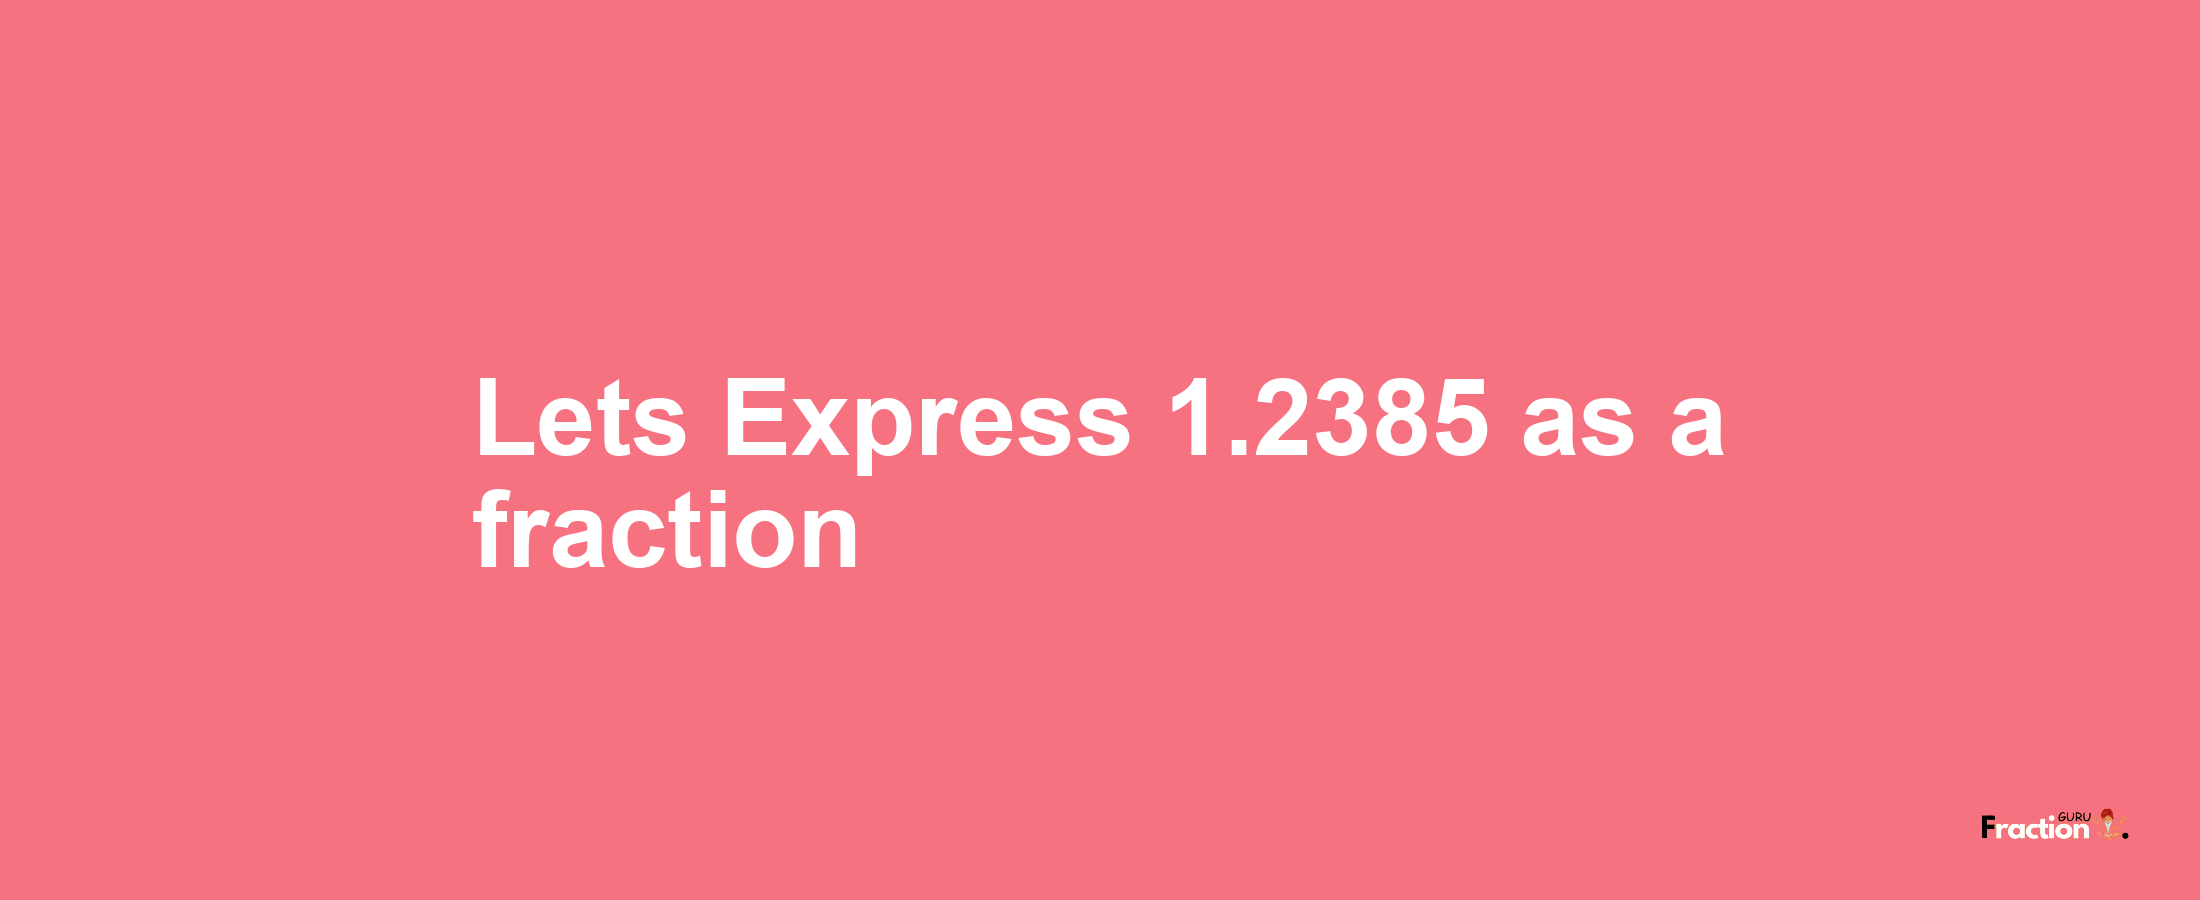 Lets Express 1.2385 as afraction